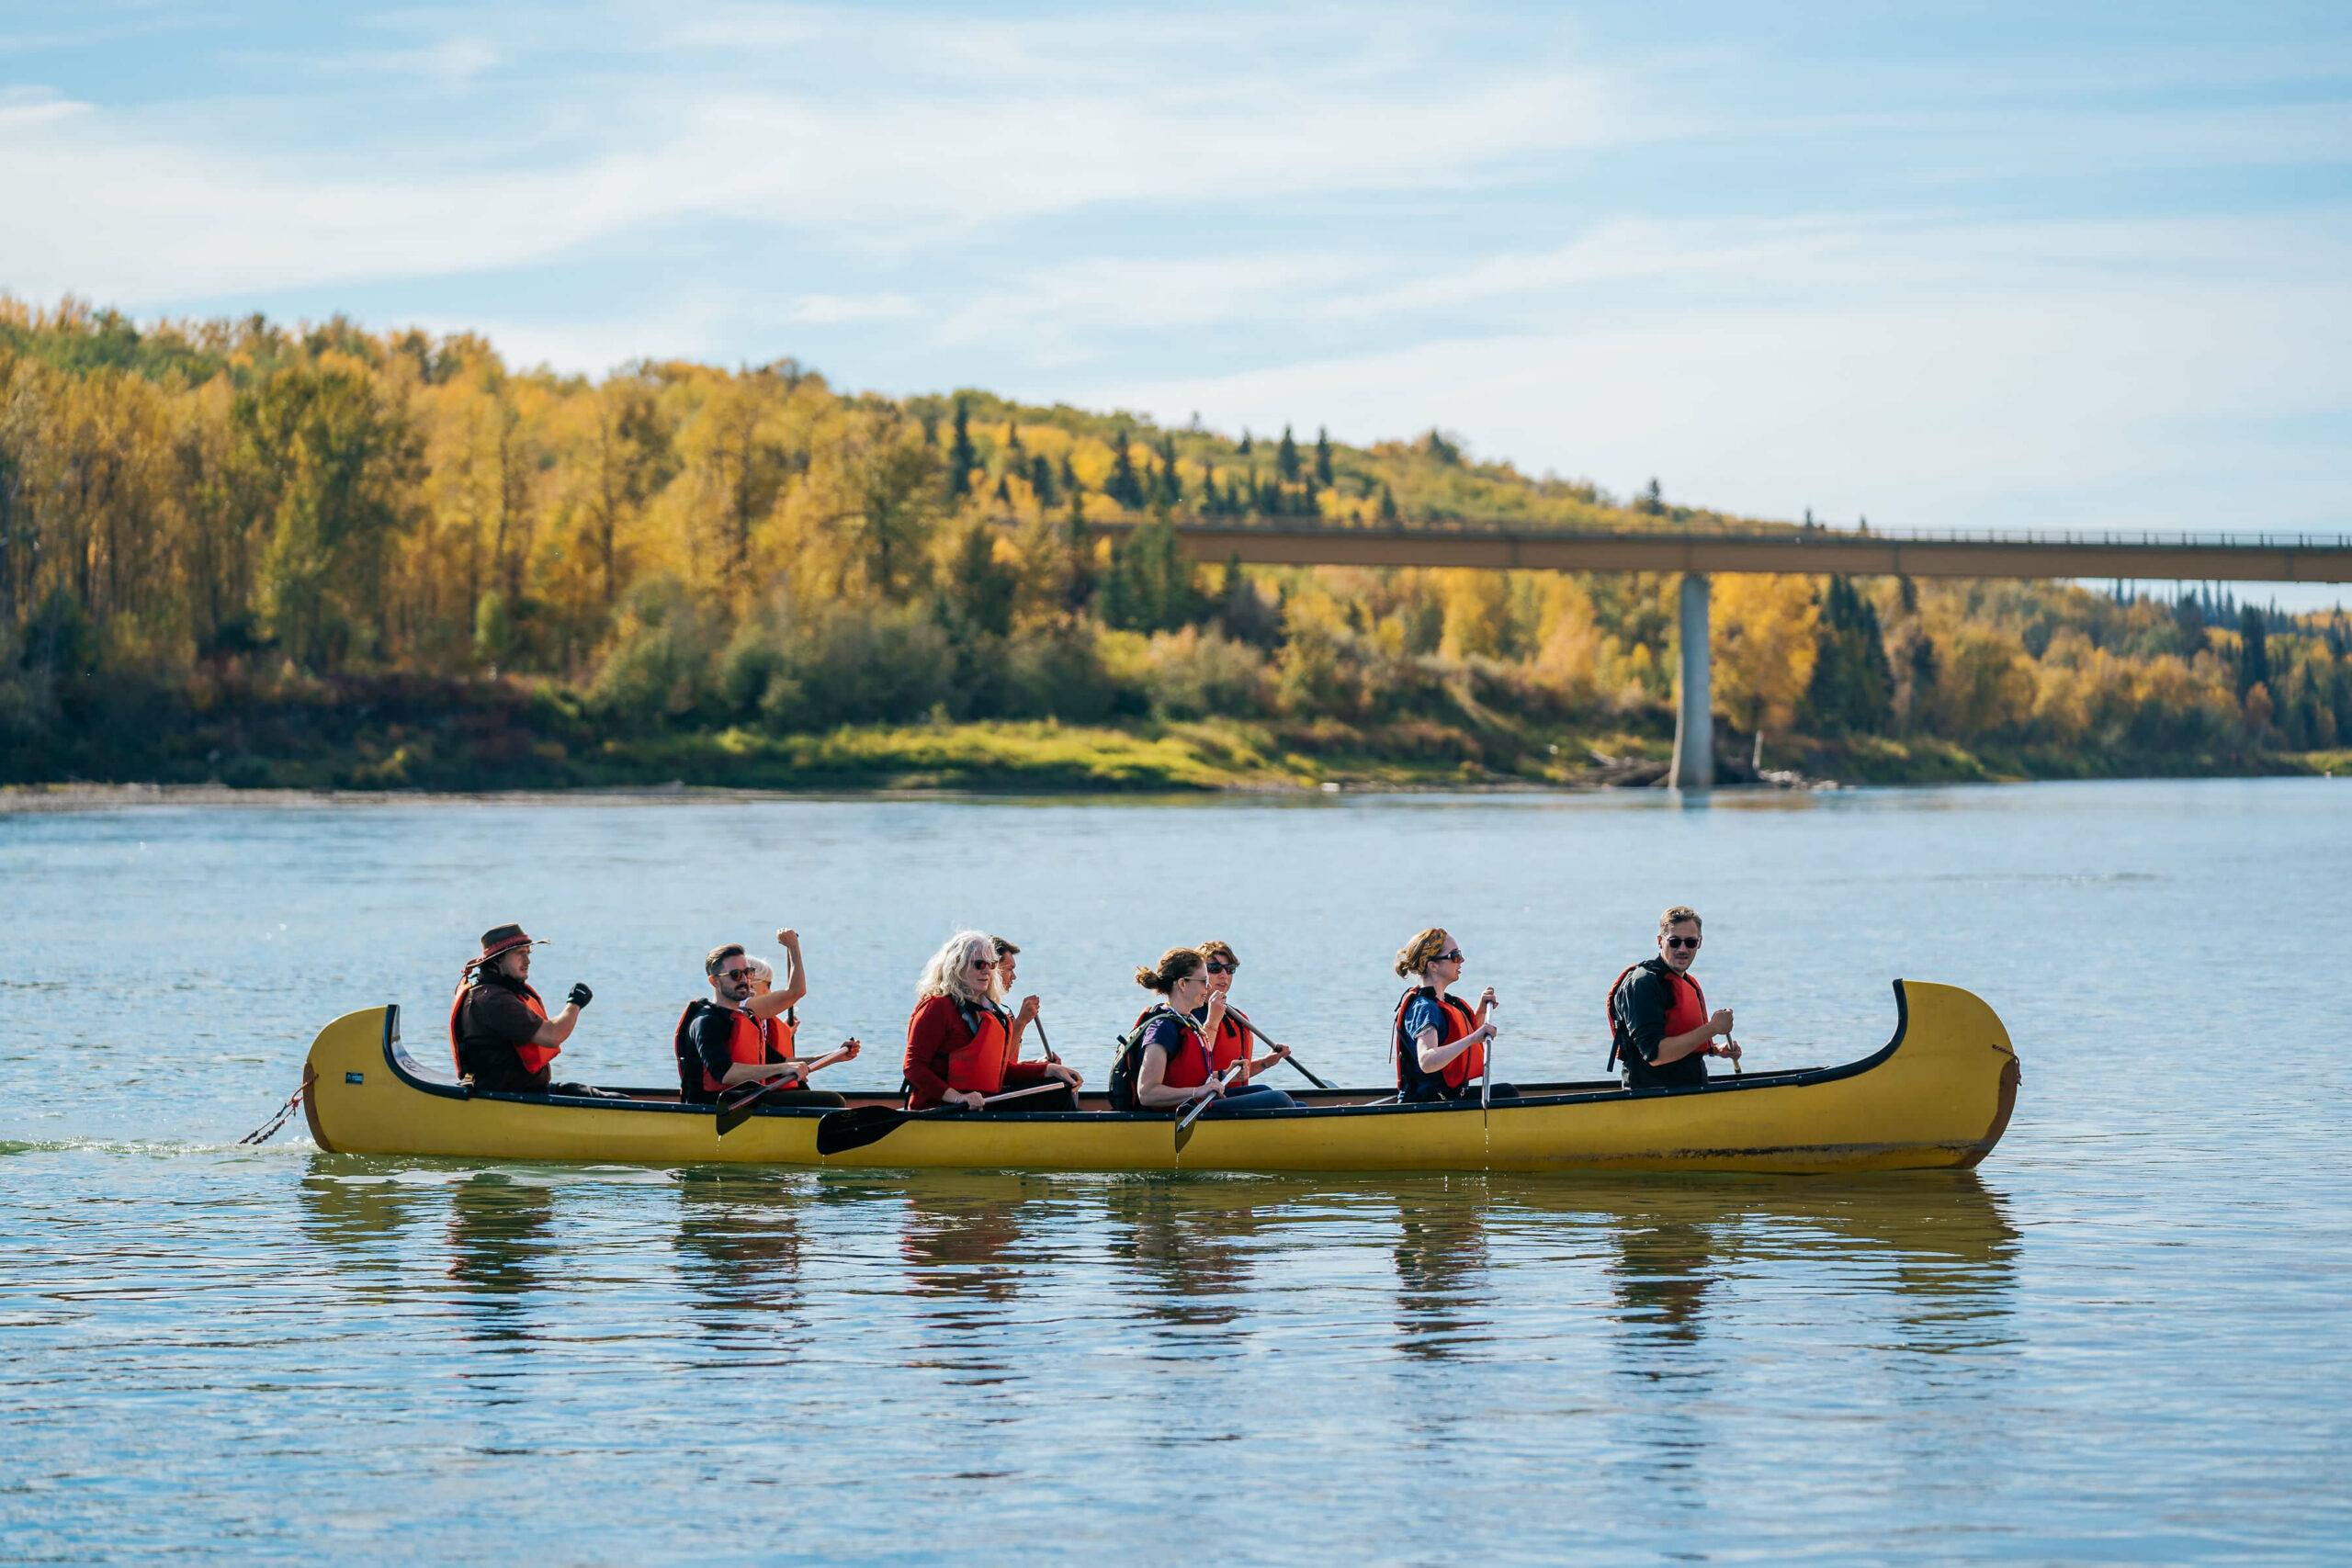 Nine people in a canoe on a calm lake with a forest and bridge in the background.